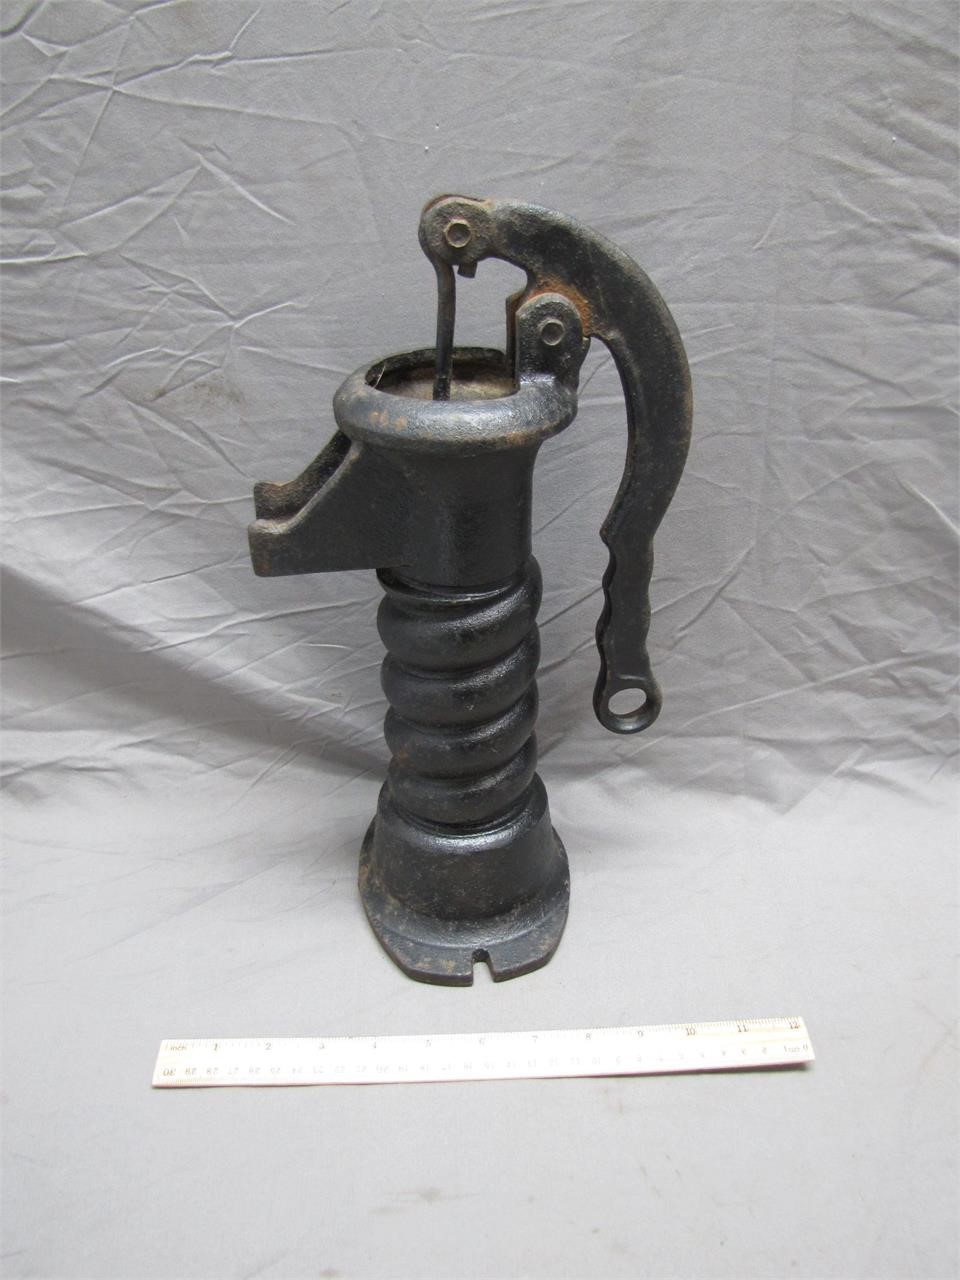 Nice Twisted Garden Faucet